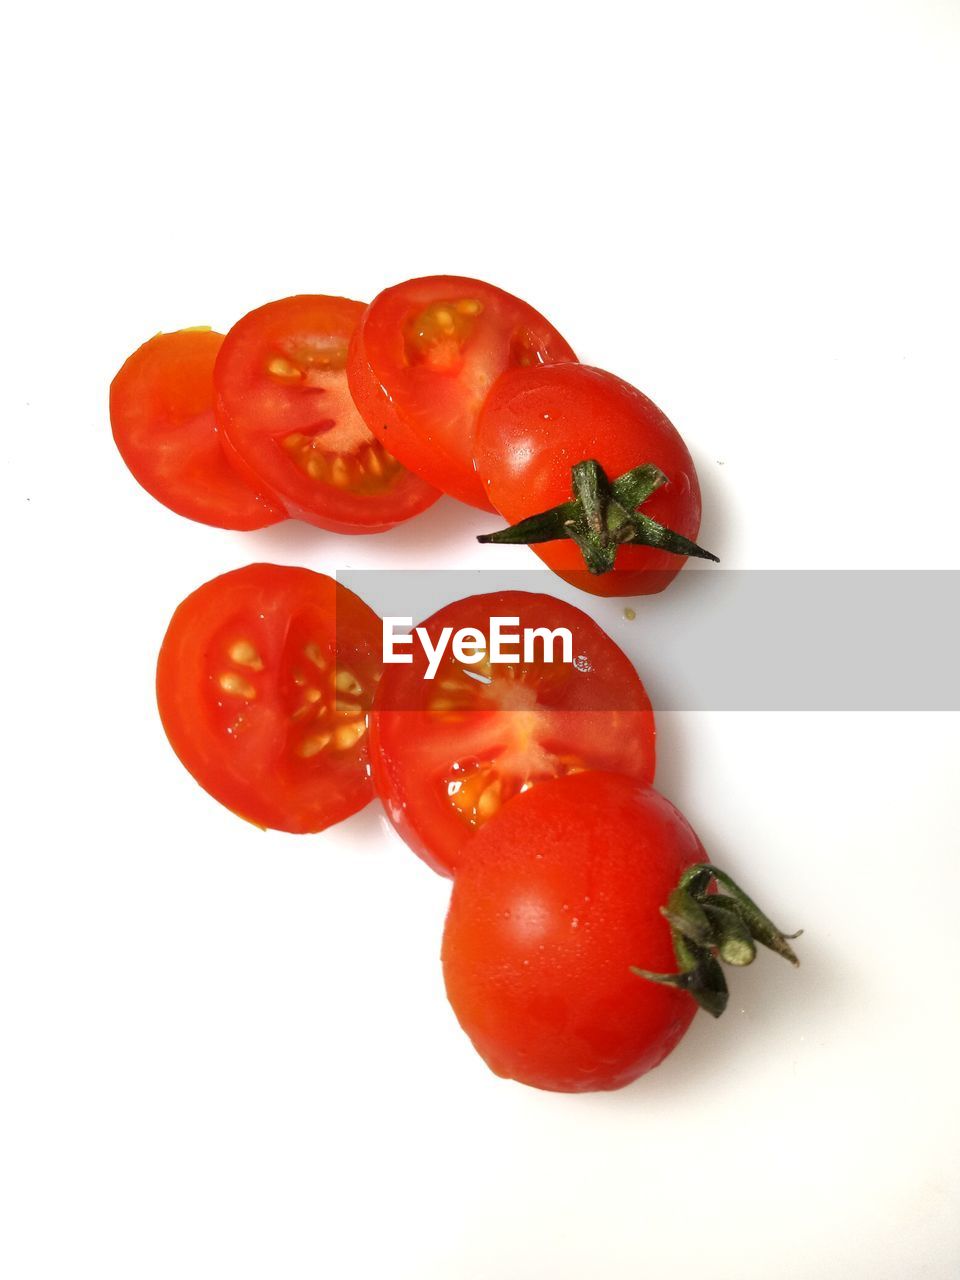 CLOSE-UP OF TOMATOES AGAINST WHITE BACKGROUND